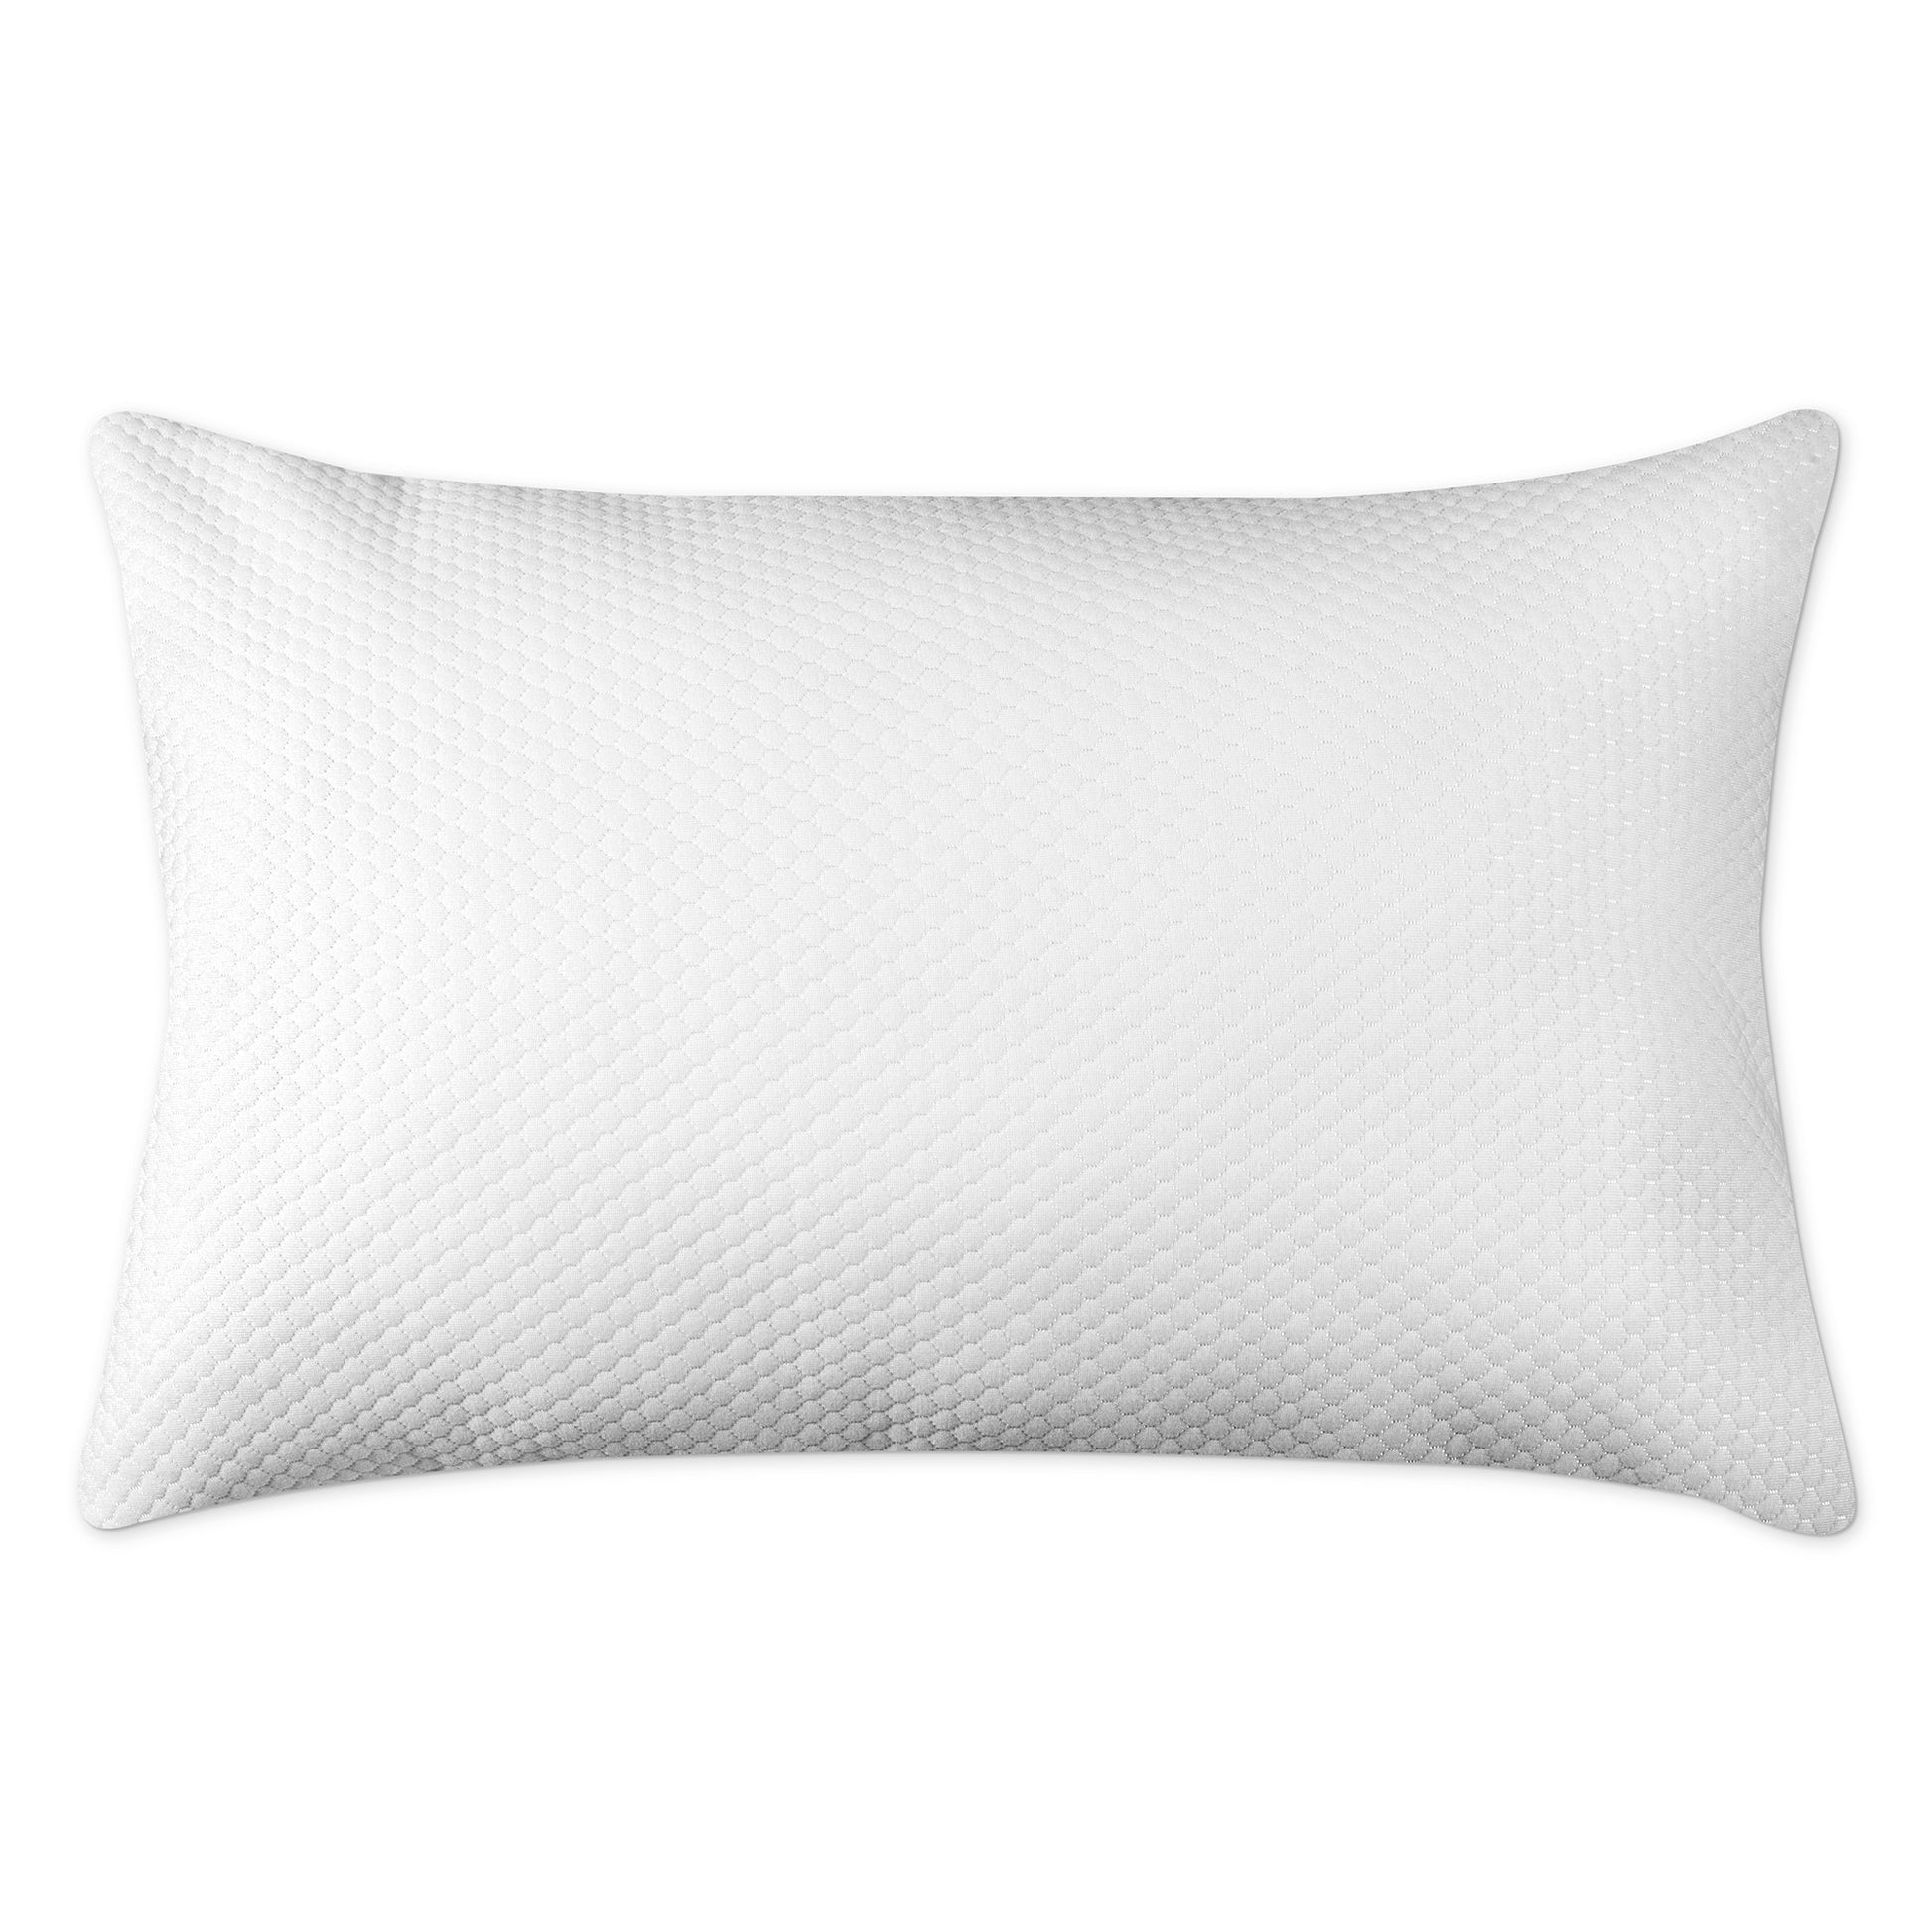 Knitted Antibacterial Cold/Hot Hotel Collection Bed Pillow, Queen Size. Designed for Back, Stomach or Side Sleepers, 30x30, White